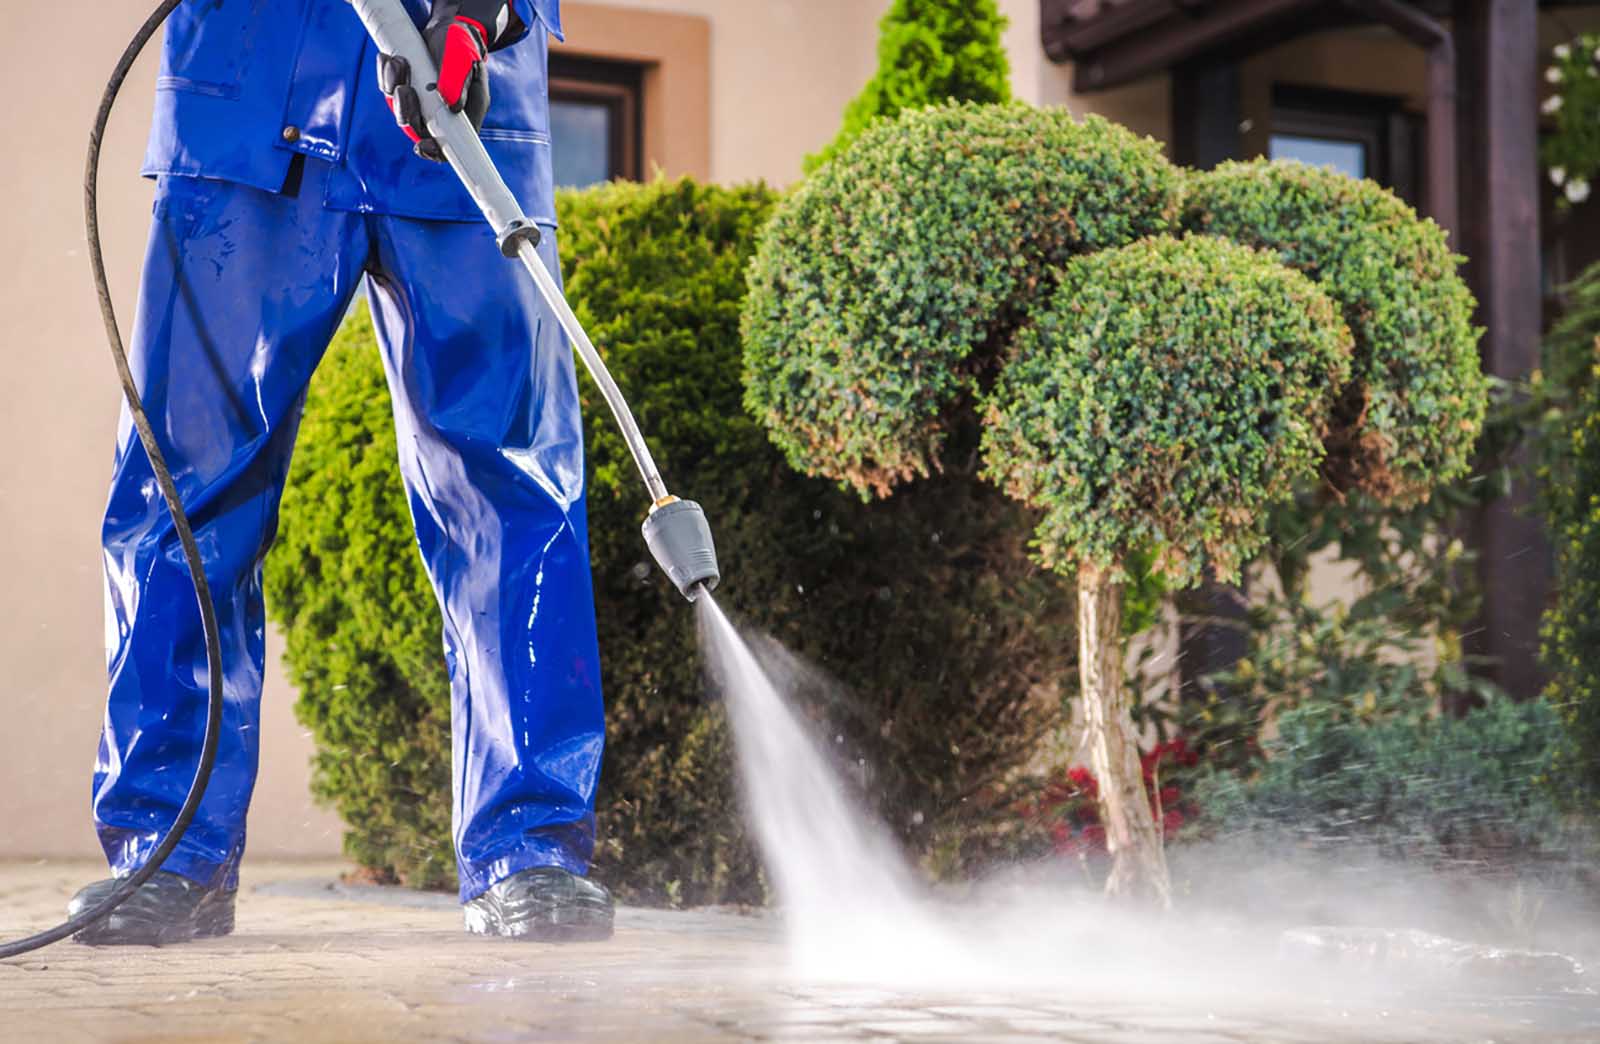 6. Is it Safe to Use a Pressure Washer?